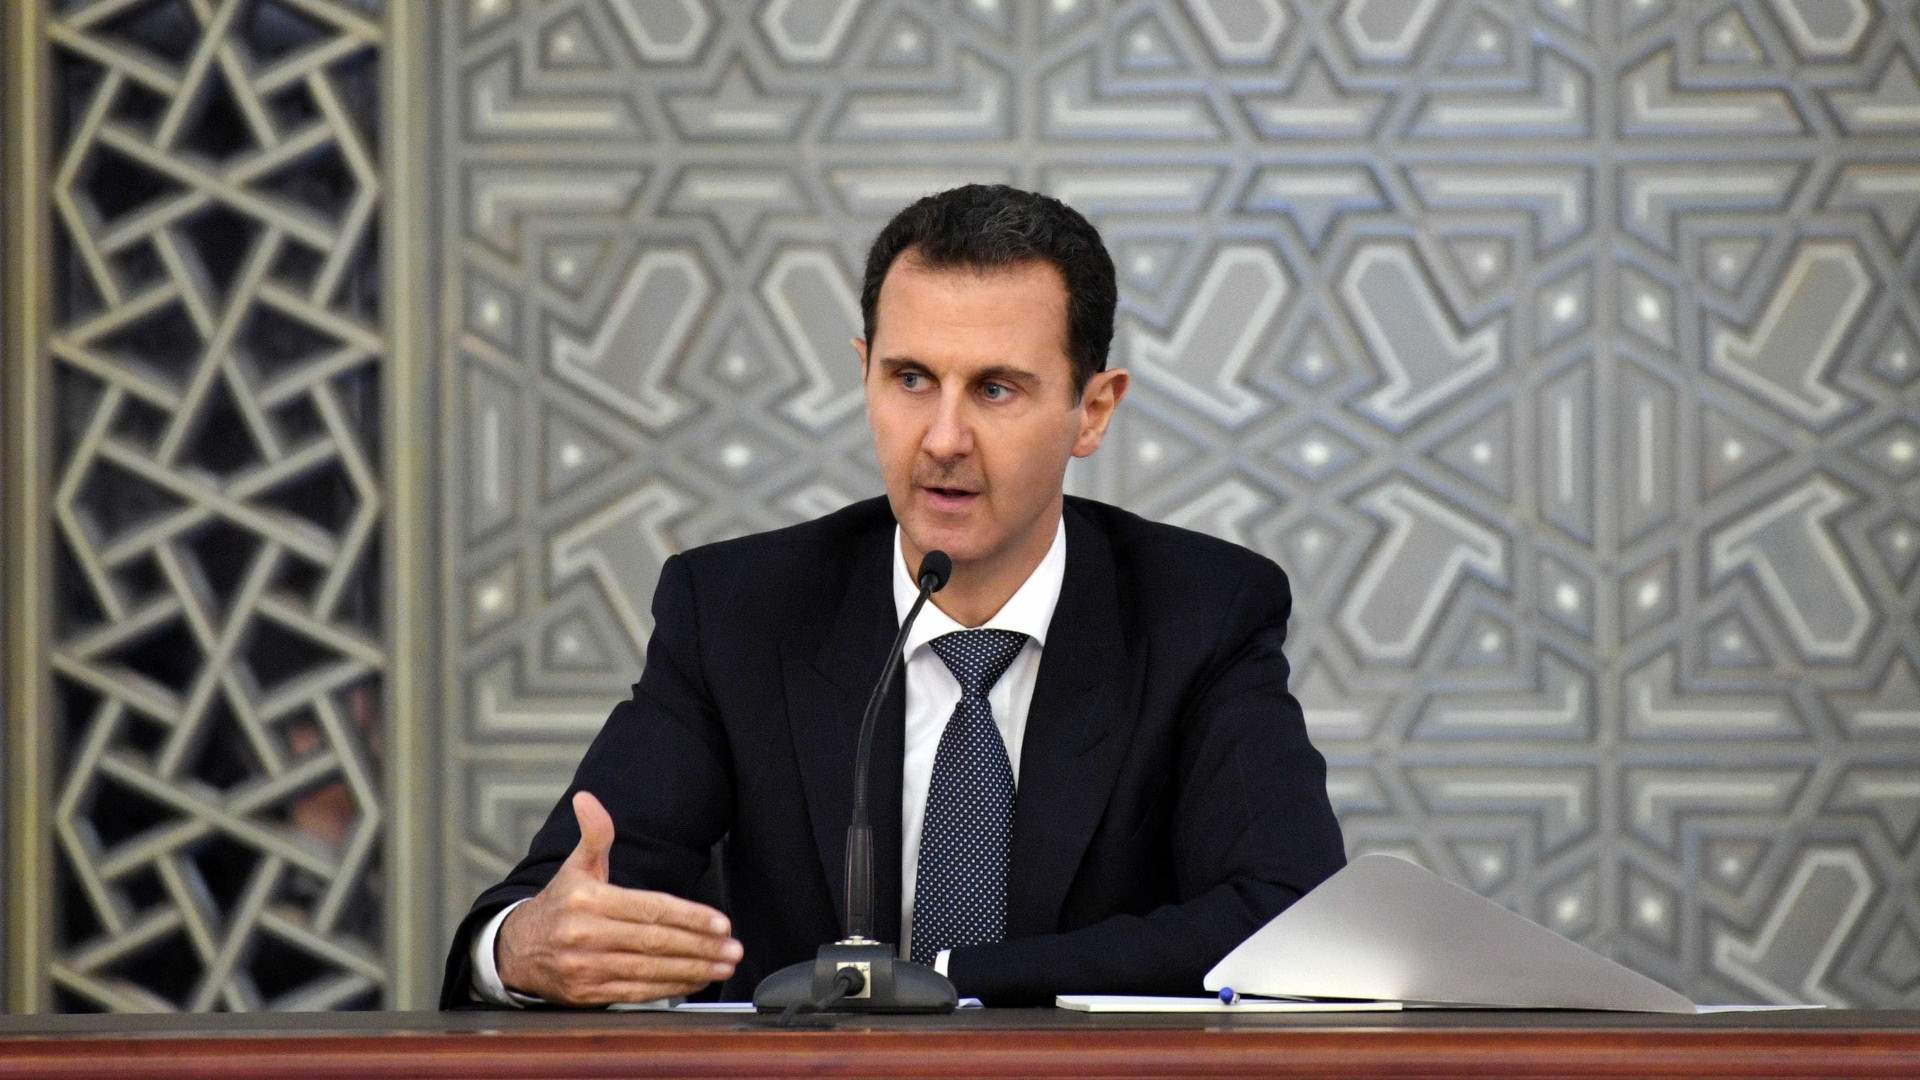 A controversial presence: Syrian president to join Arab League Summit in Jeddah